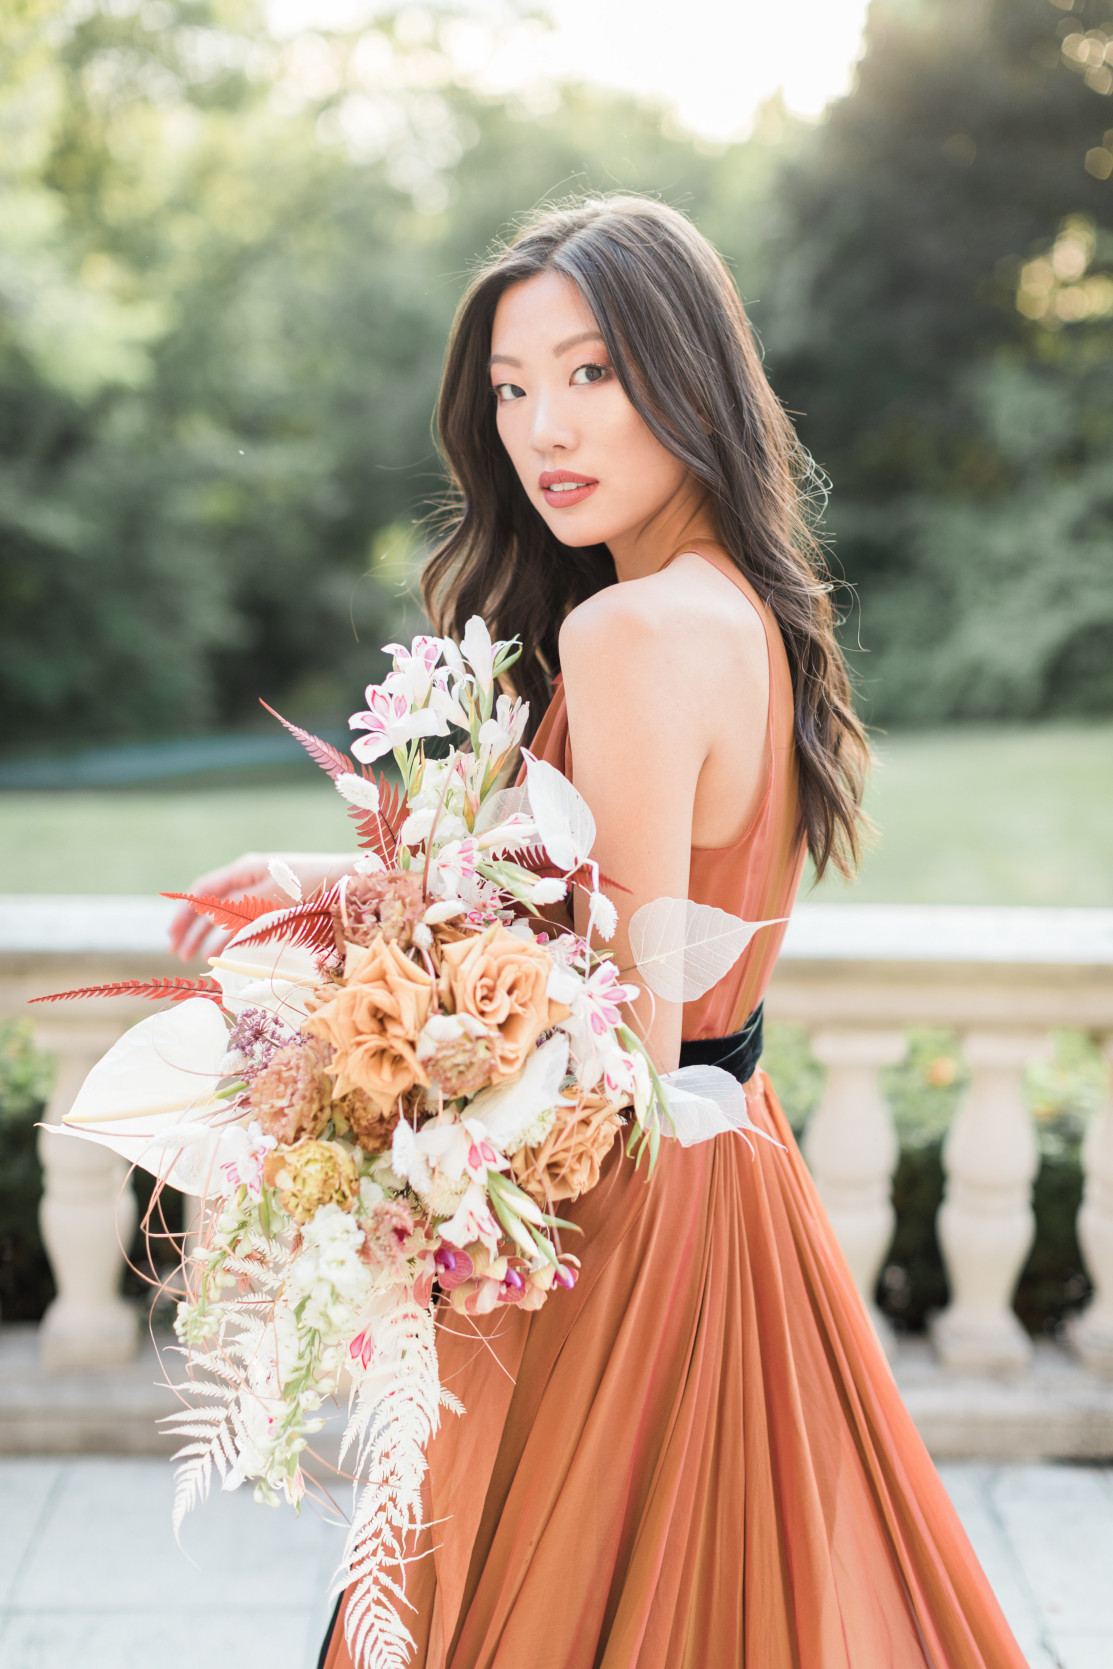 Fall wedding bouquet by Isibeal Studio. Created for a beautiful micro wedding. Decadent yet delicate style.